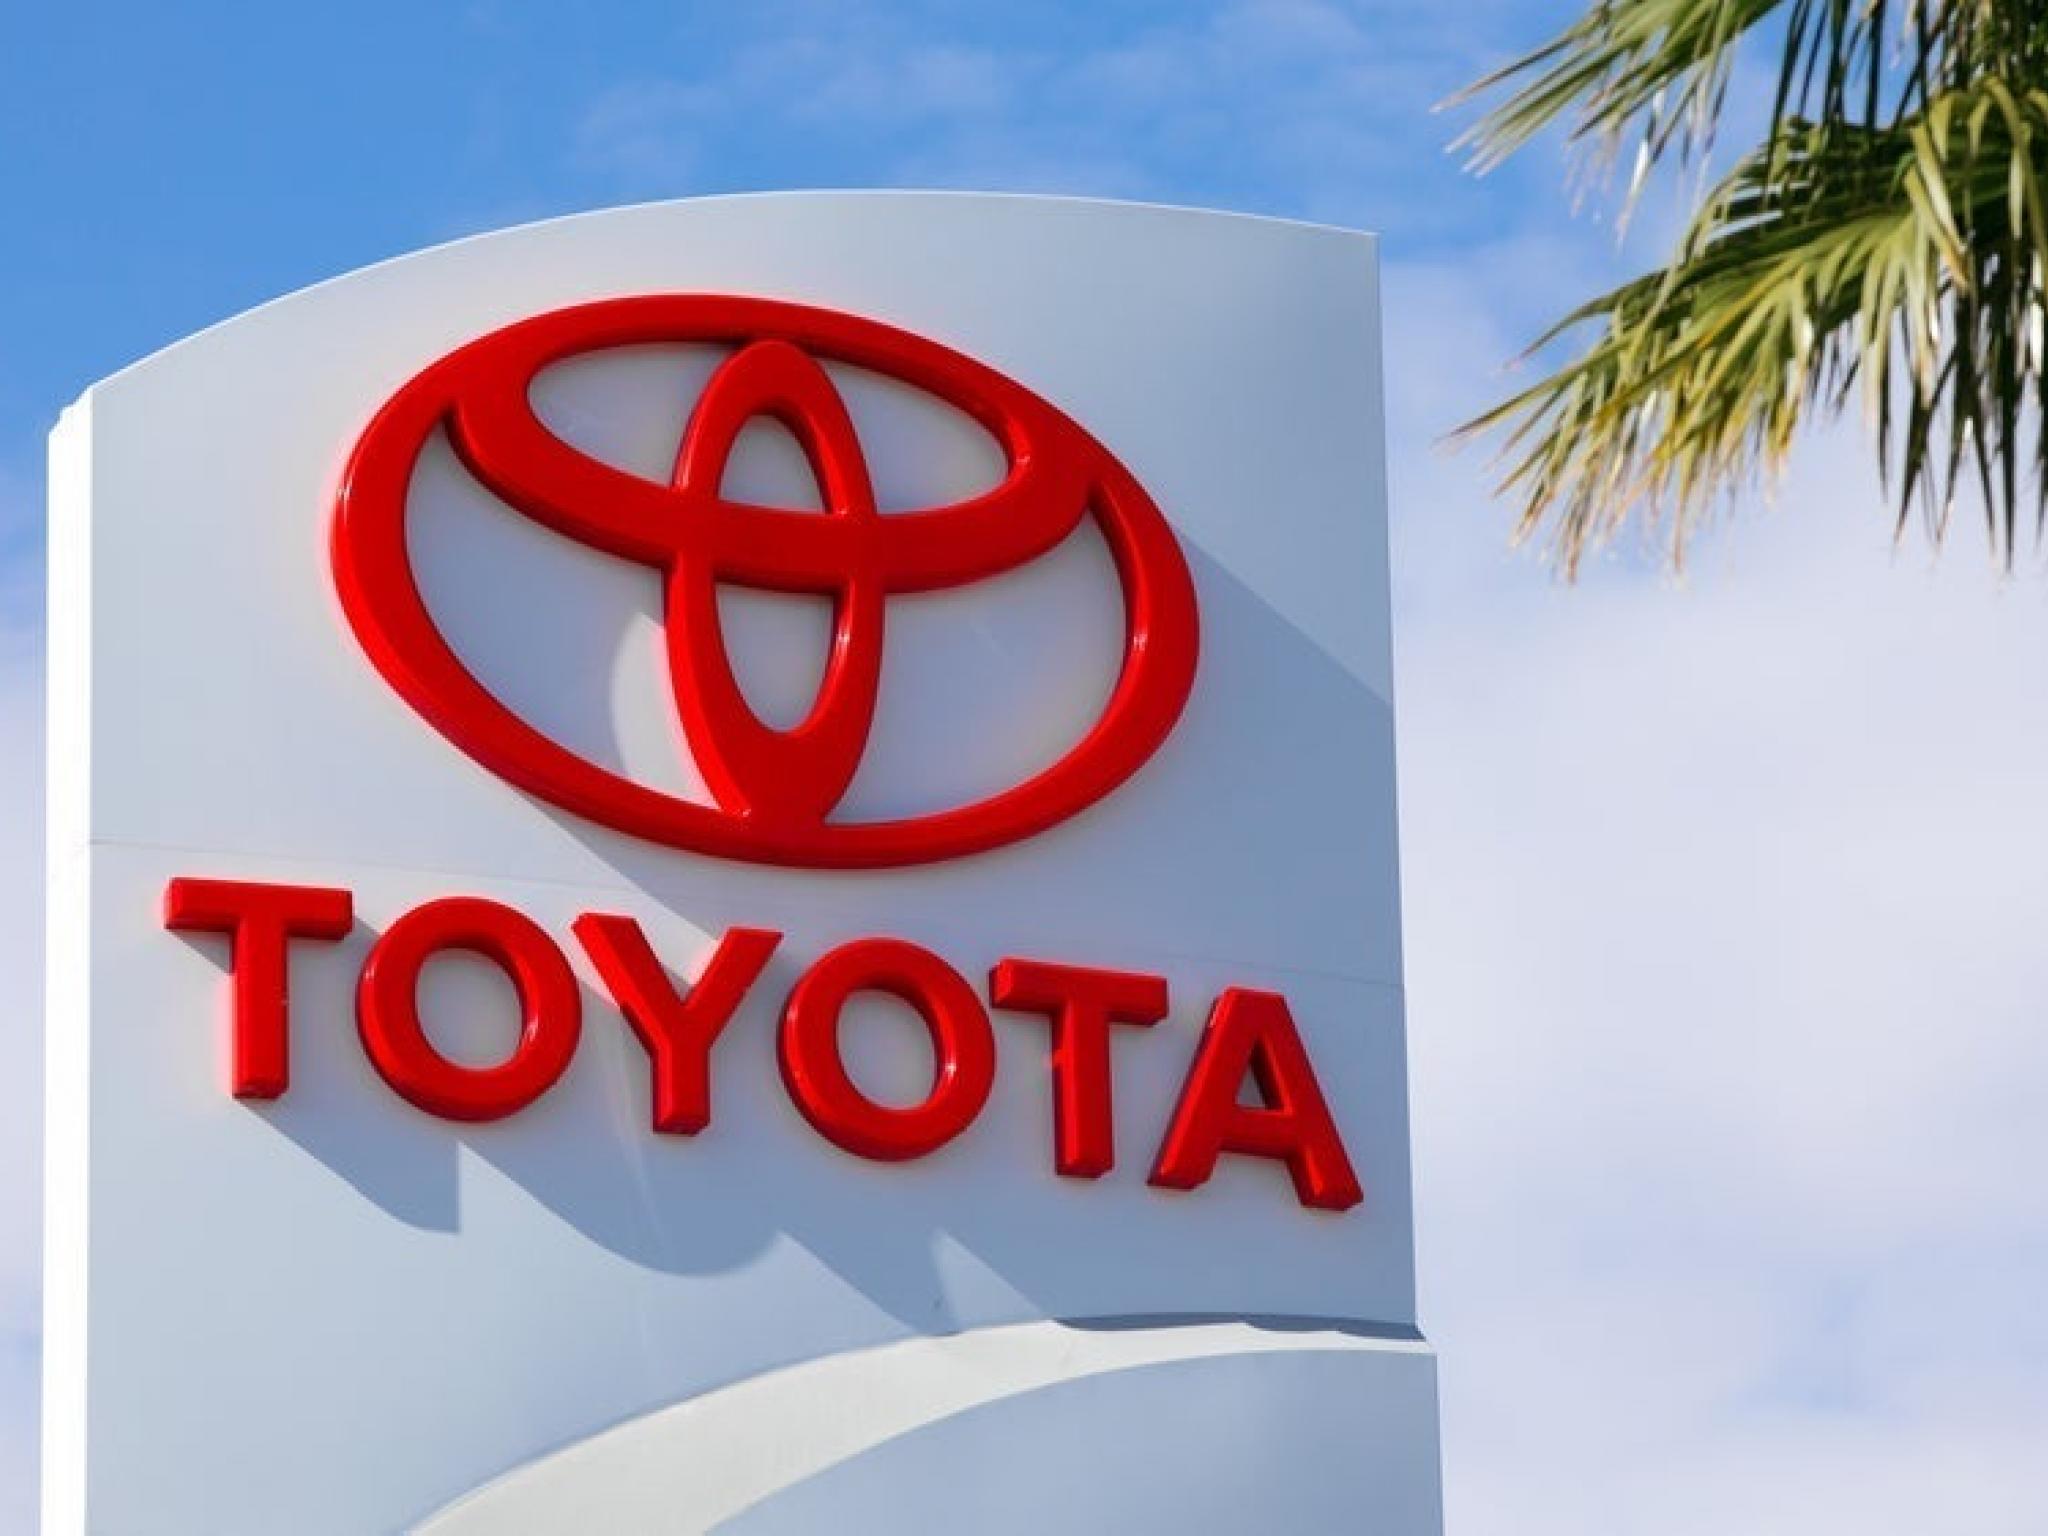  toyota-plans-to-integrate-robosense-lidar-in-lexus-electric-models-future-expansion-across-other-brands-expected 